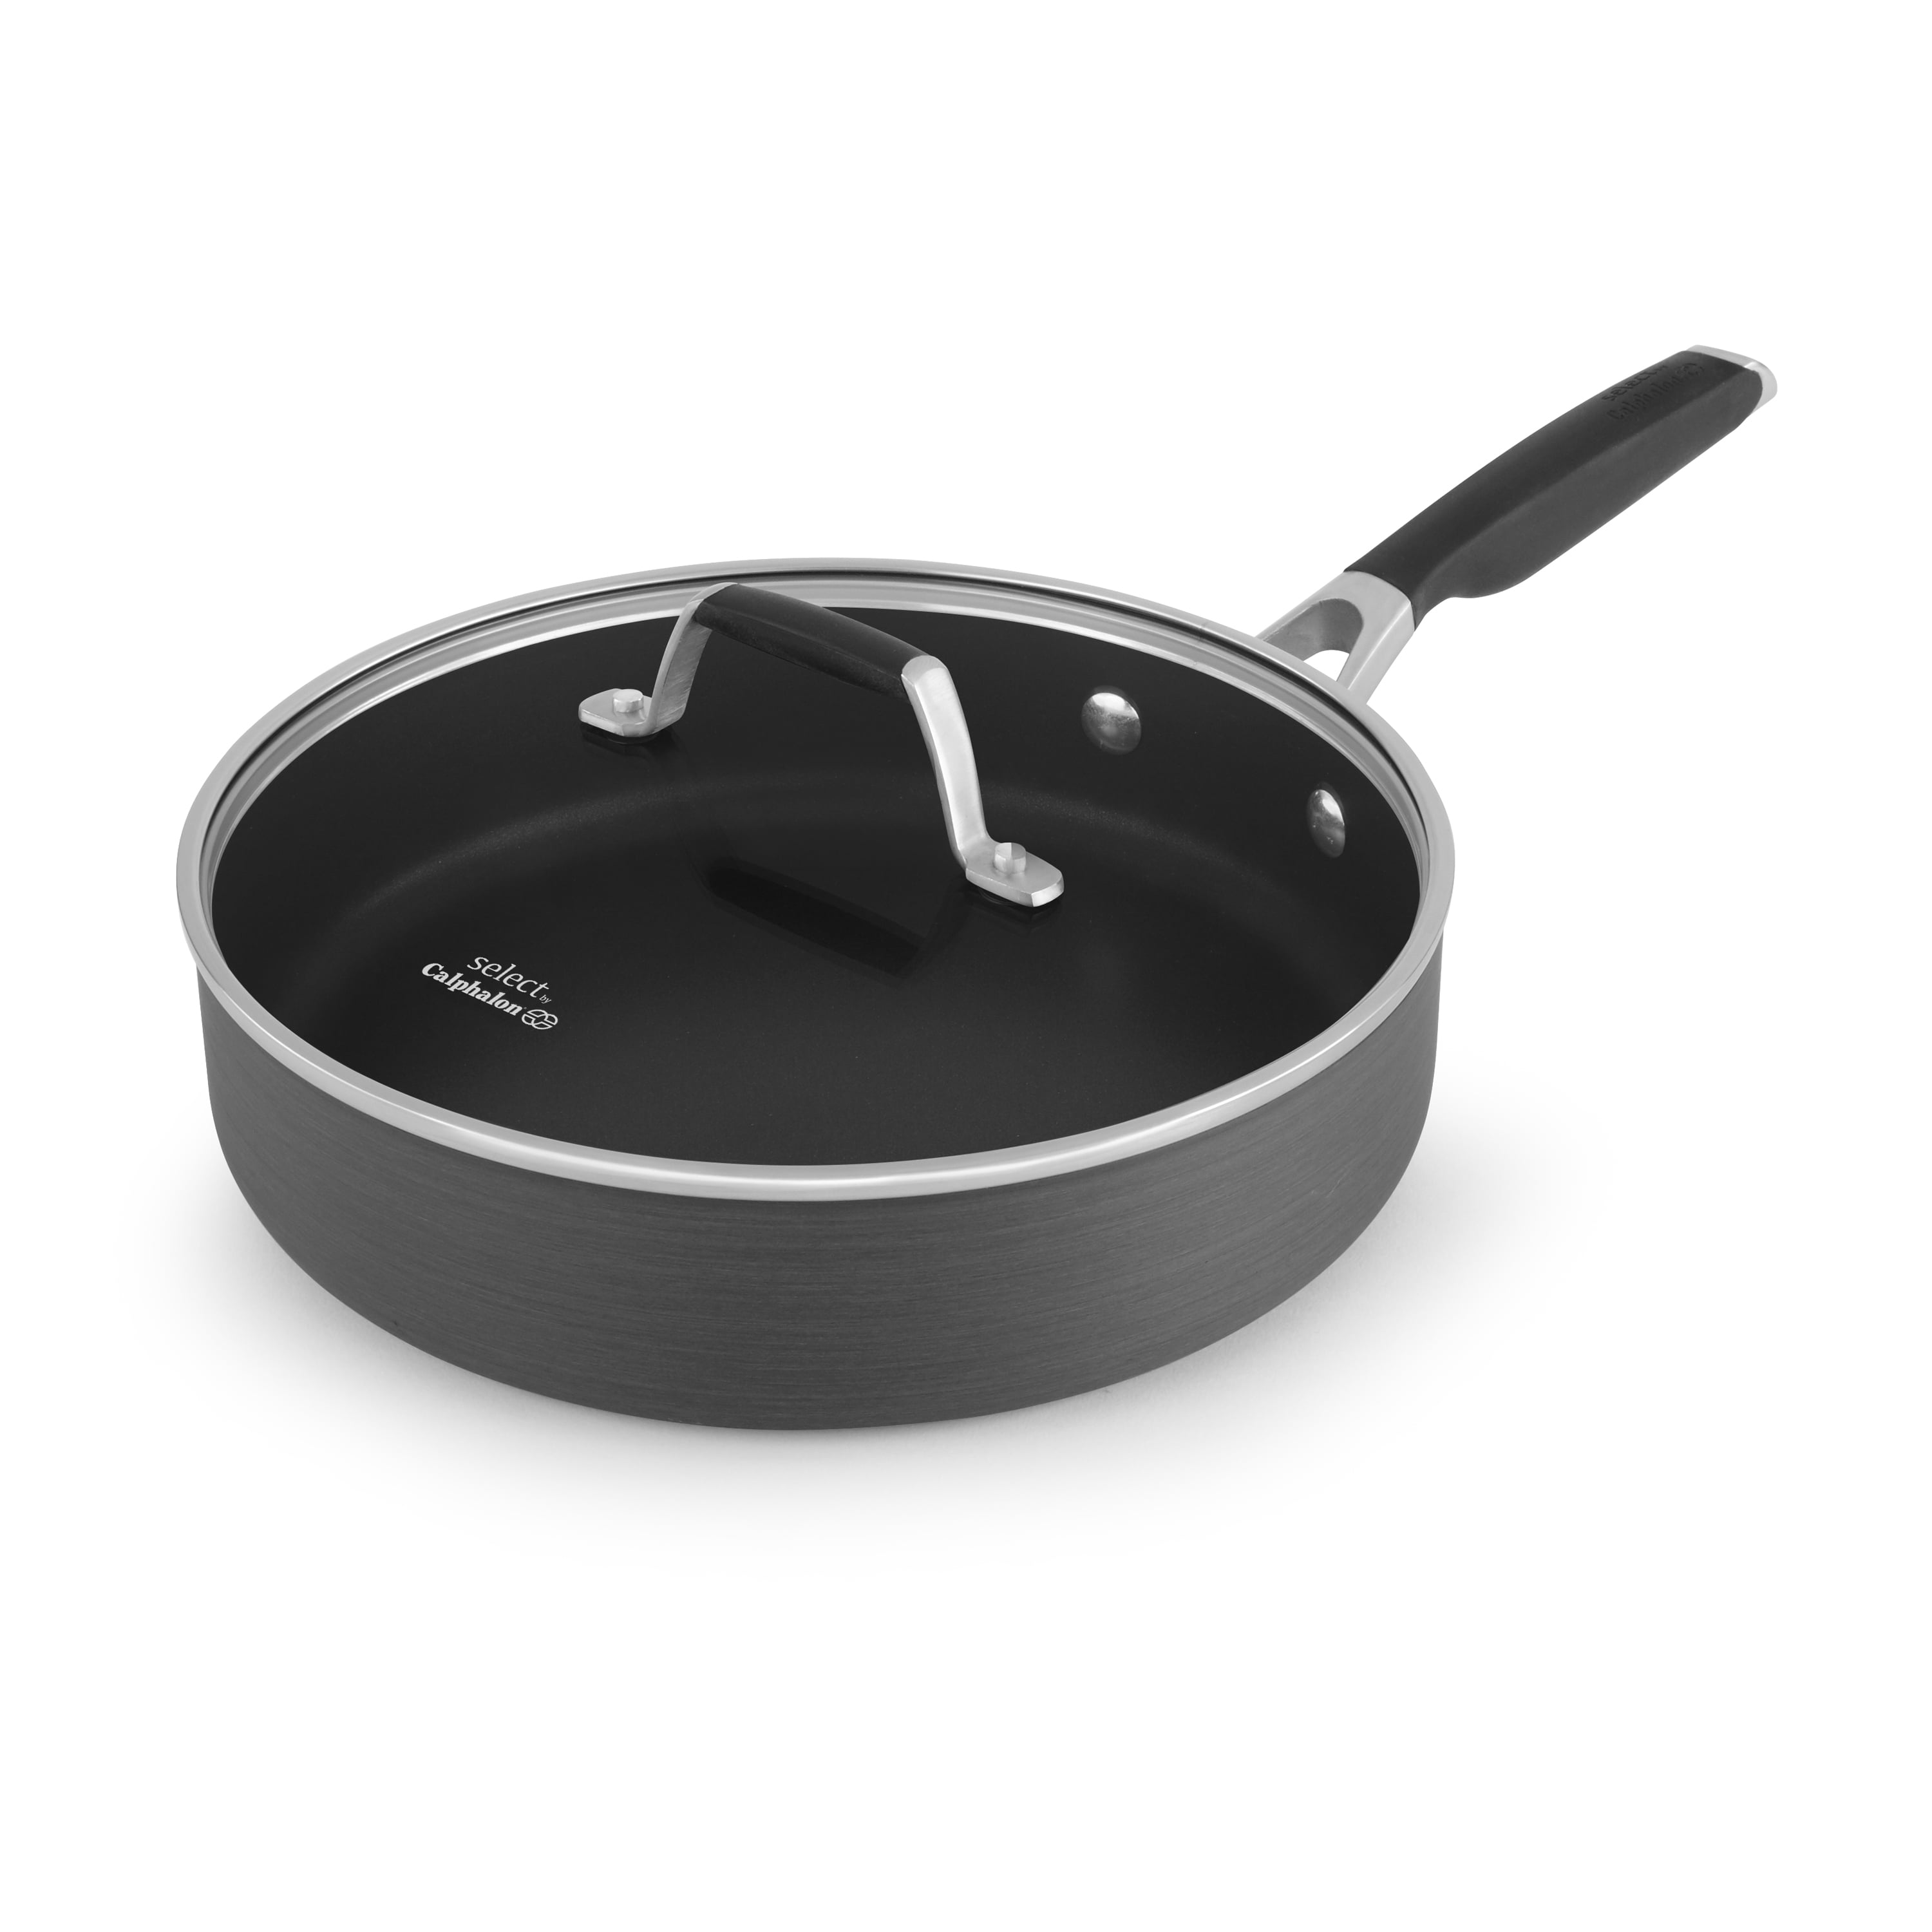 Select by Calphalon Hard-anodized Nonstick 3-Quart Saute Pan with Cover 